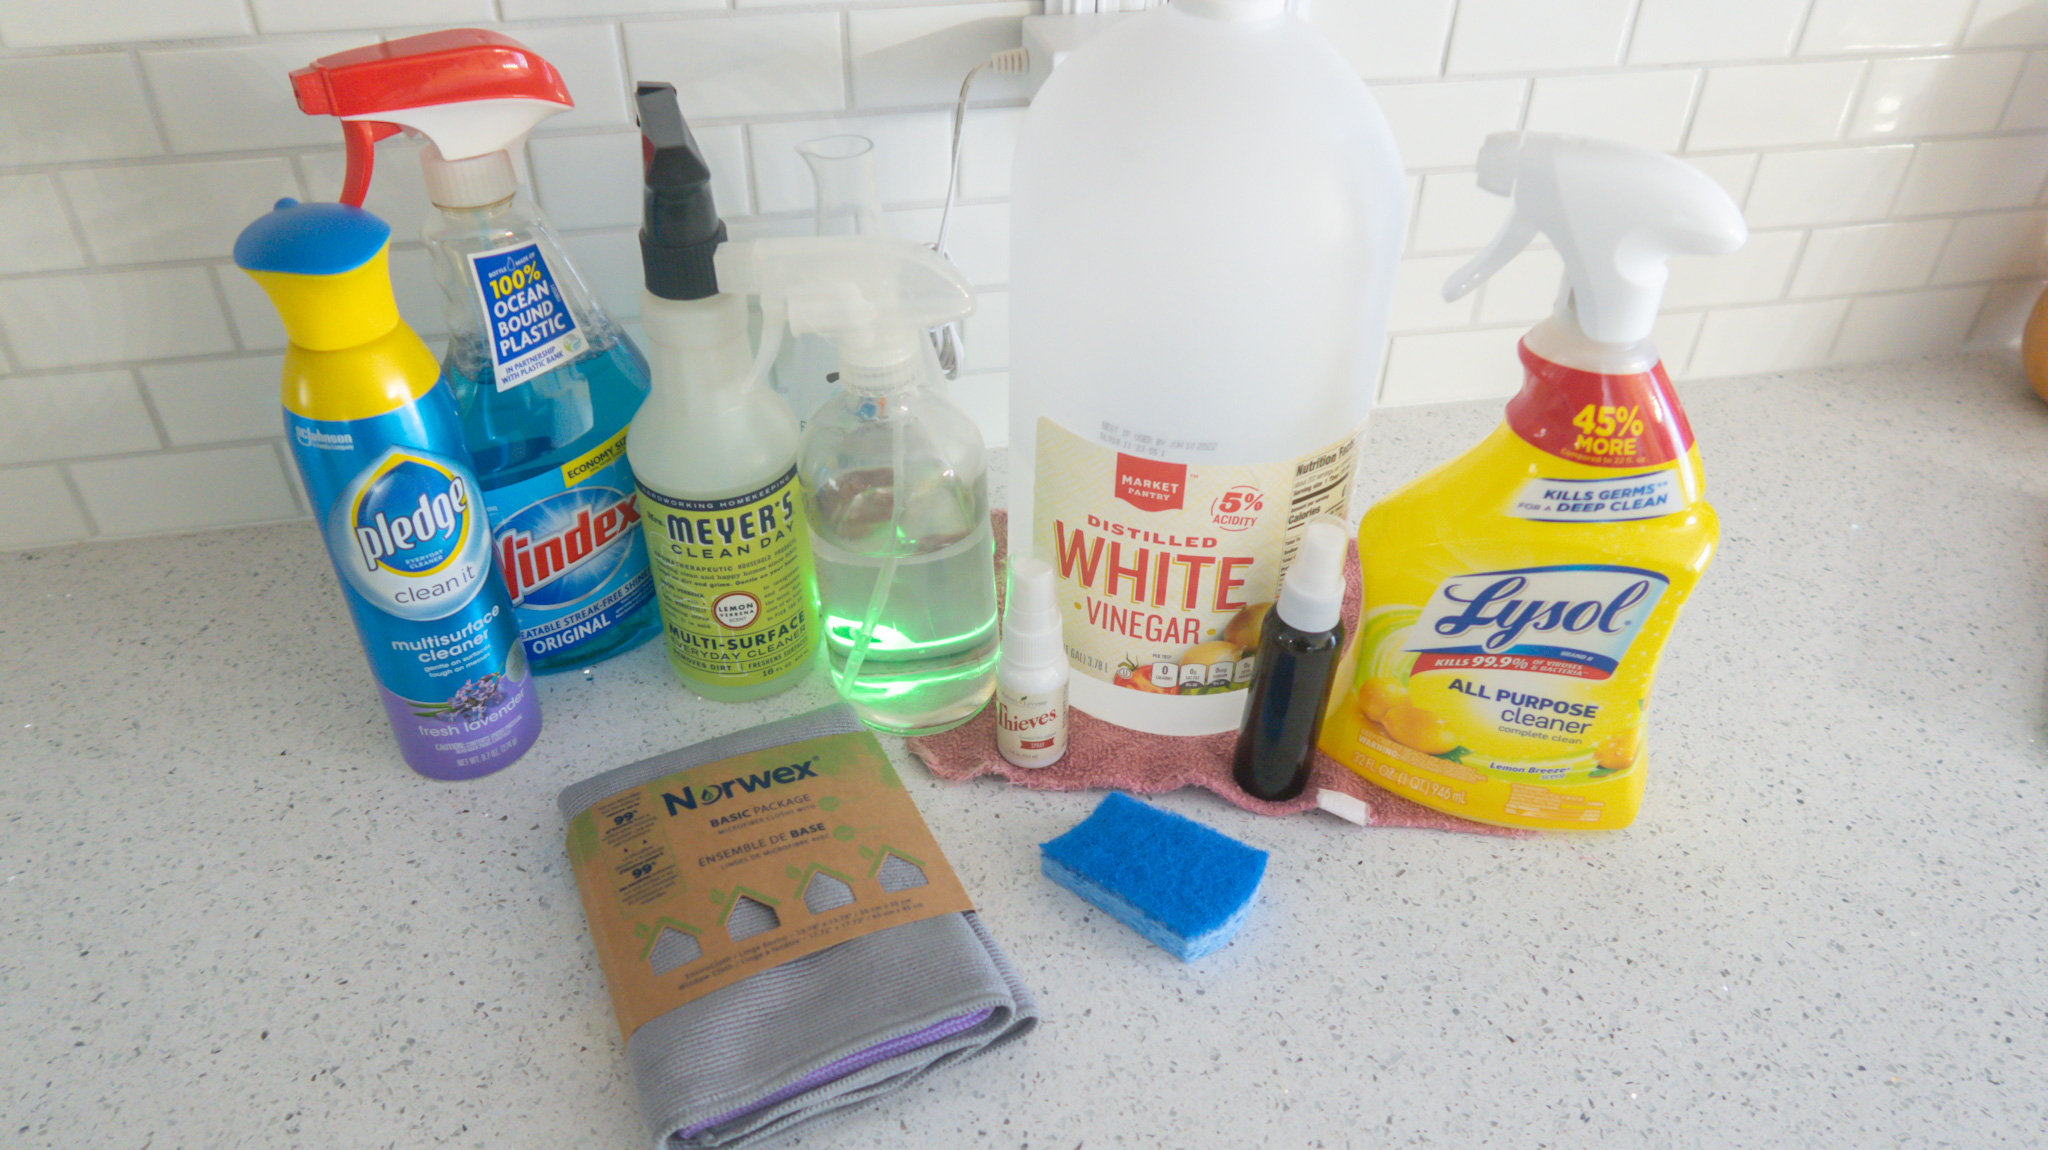 Chemical Specialty Product Testing for Household Cleaning Products